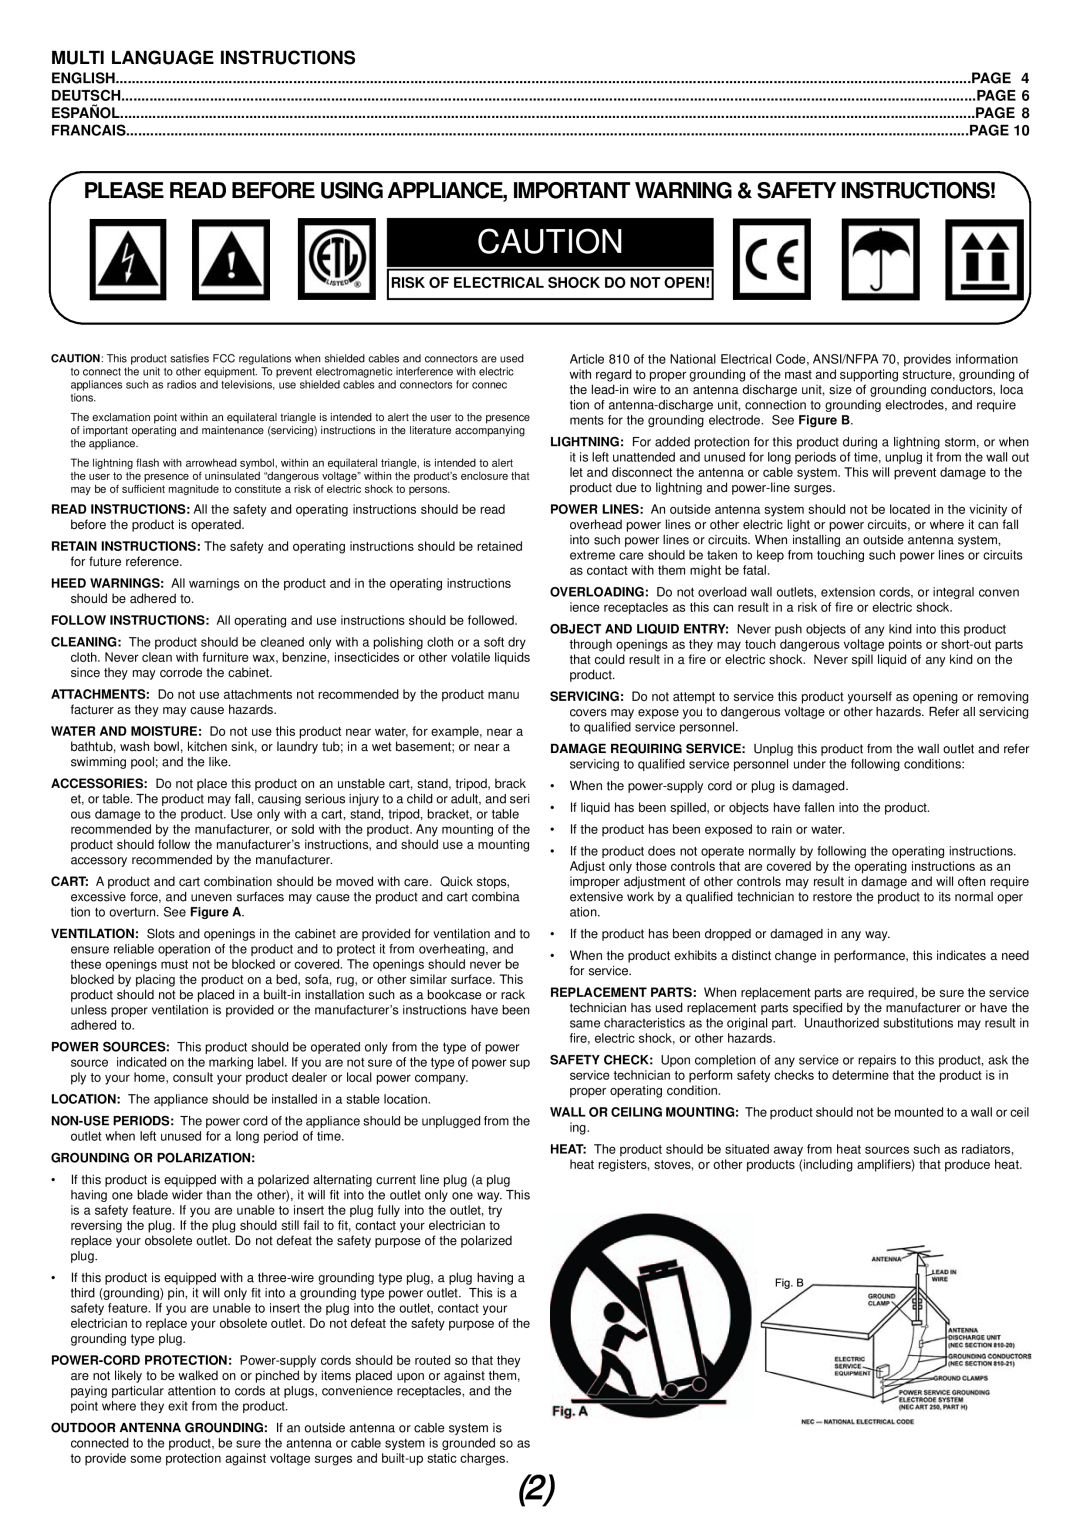 Gemini Industries TT-002MKII Multi Language Instructions, Page, Risk Of Electrical Shock Do Not Open, English, Francais 